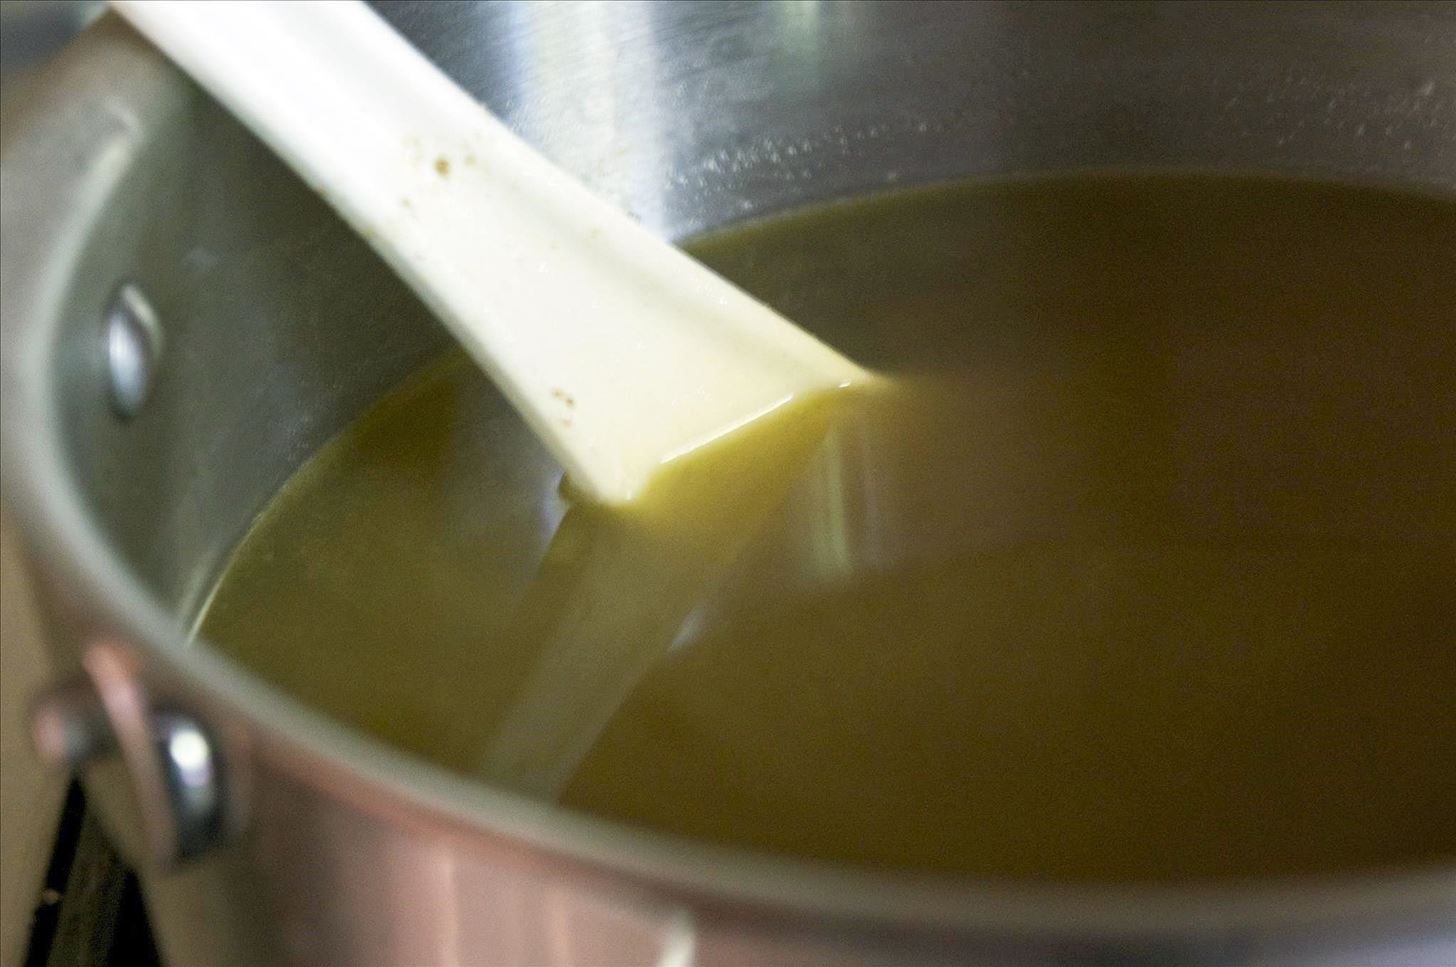 Ingredients 101: The Essential Homemade Chicken Stock